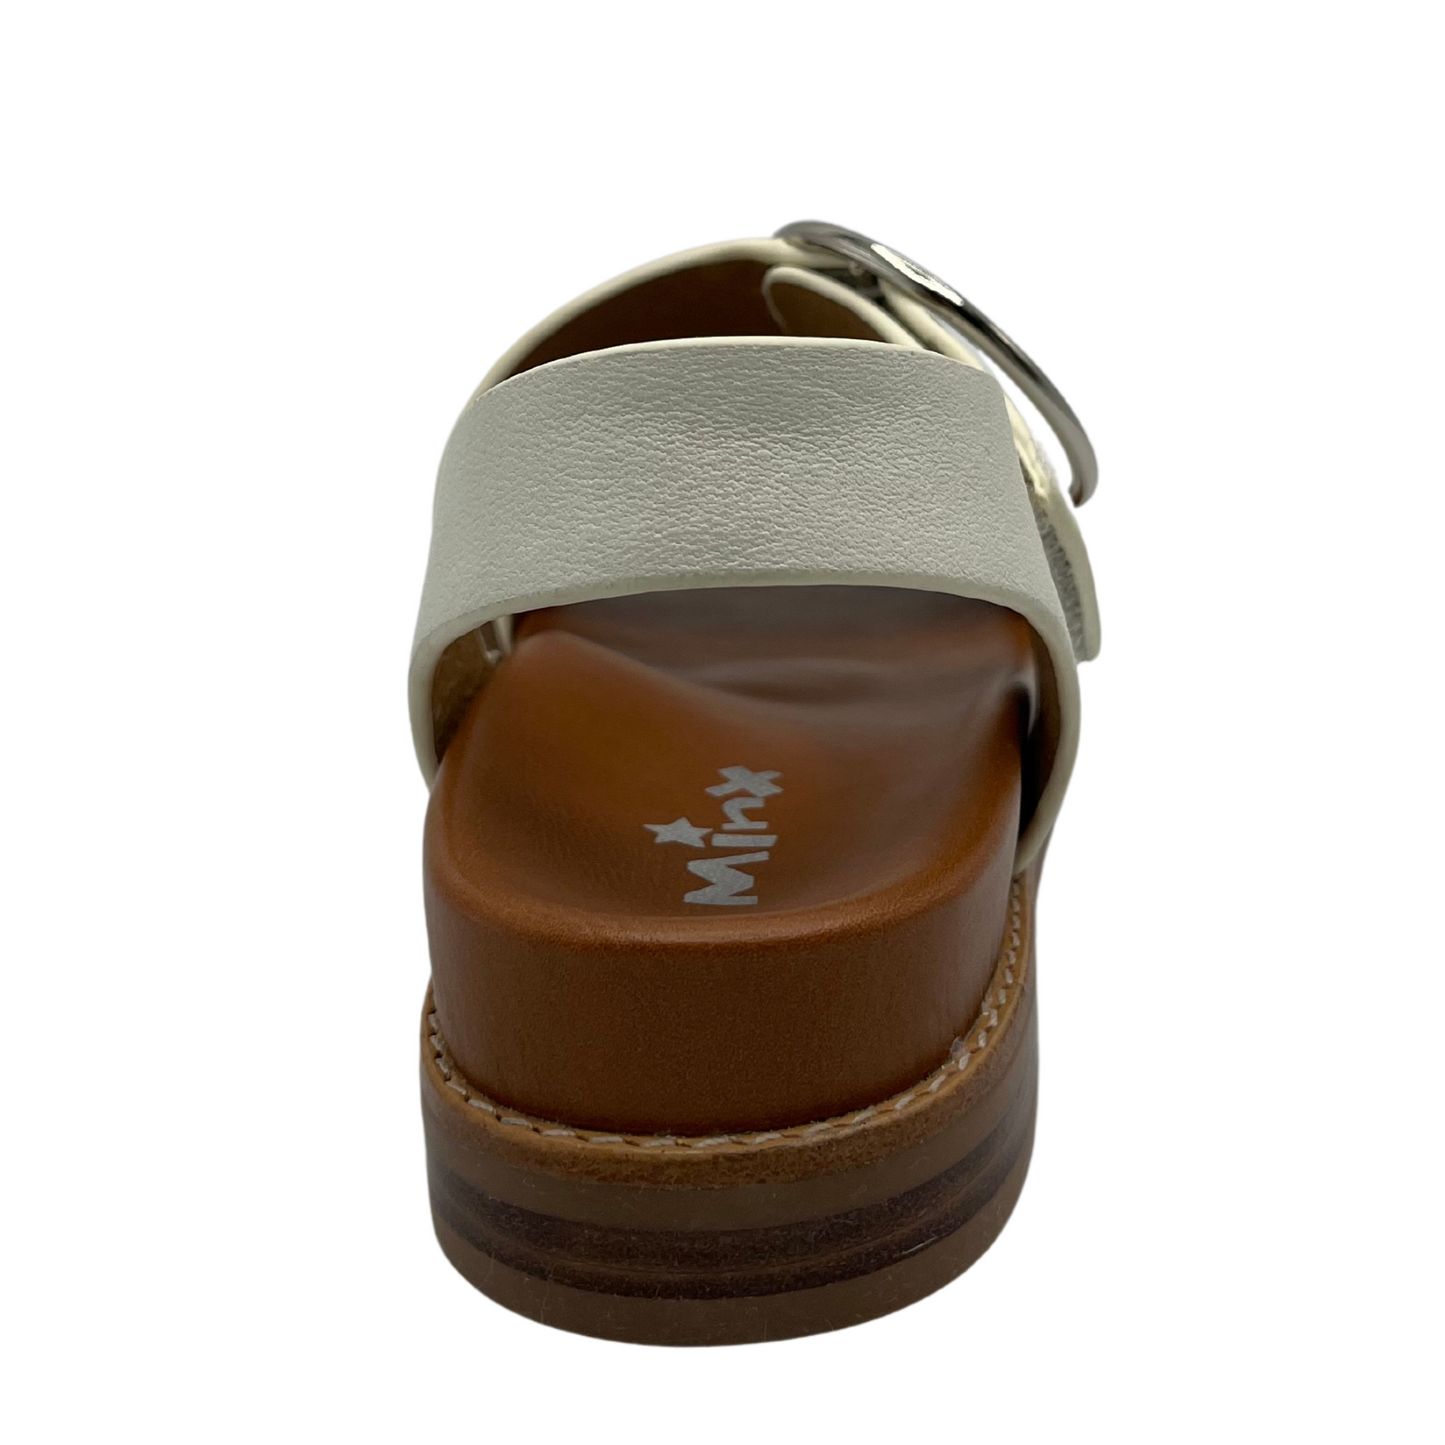 Back view of white leather strapped sandals with tan leather lining. Large round silver buckle and low heel